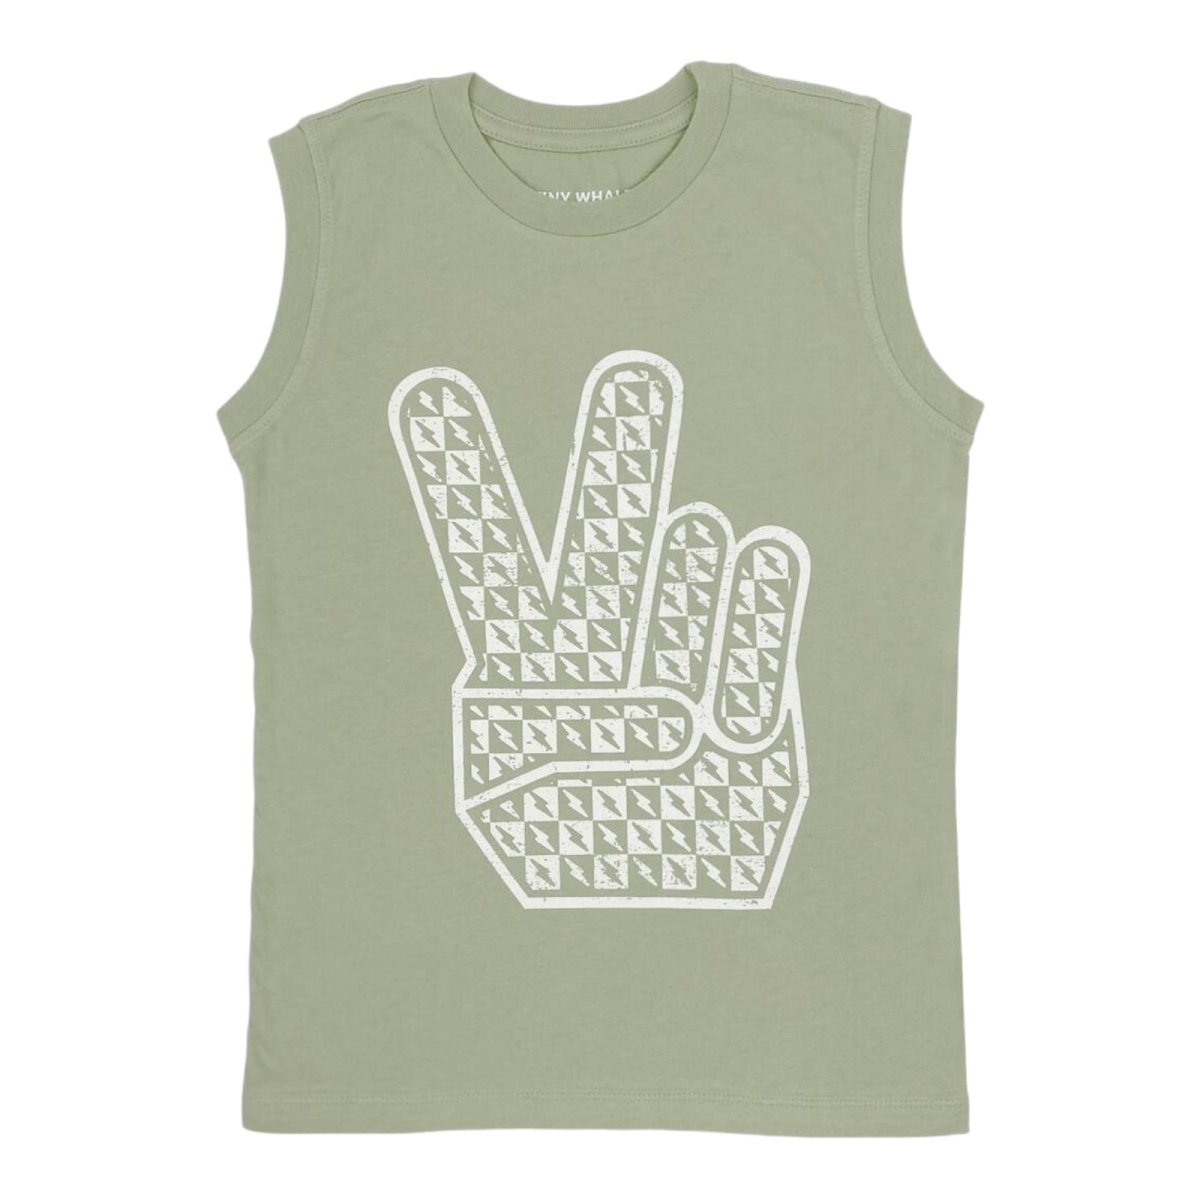 PEACE OUT MUSCLE TANK TOP - TANK TOPS